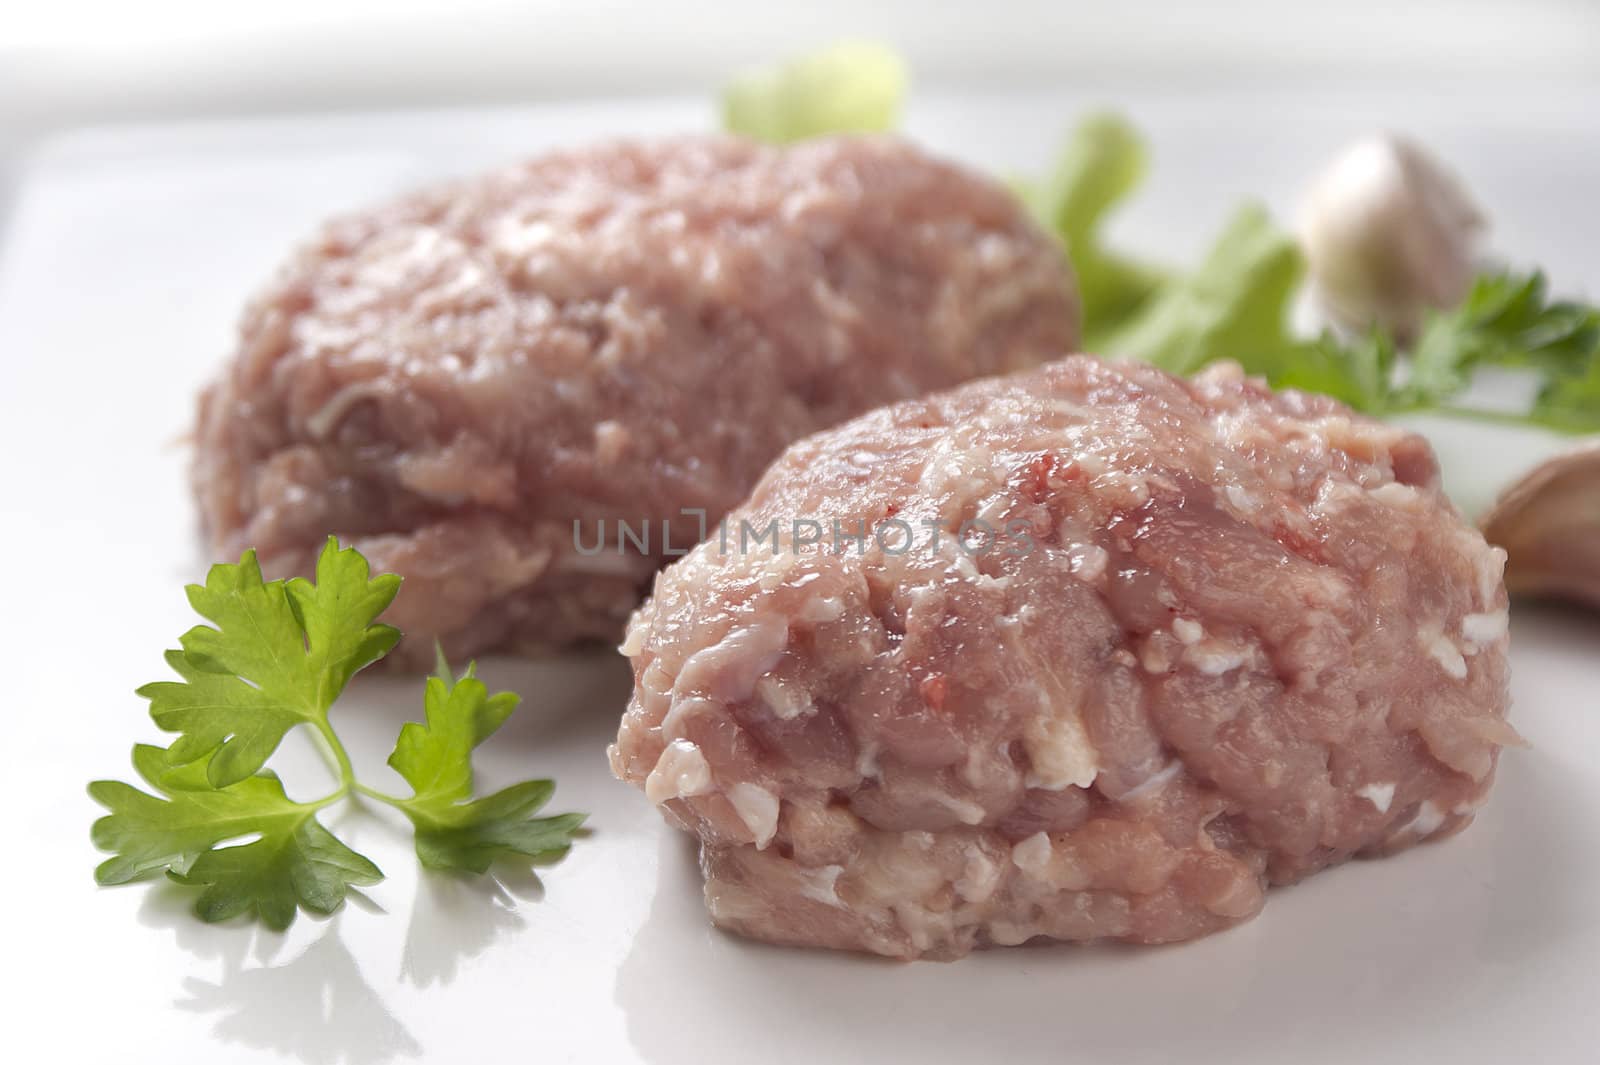 Two raw chicken rissole with parsley and garlic